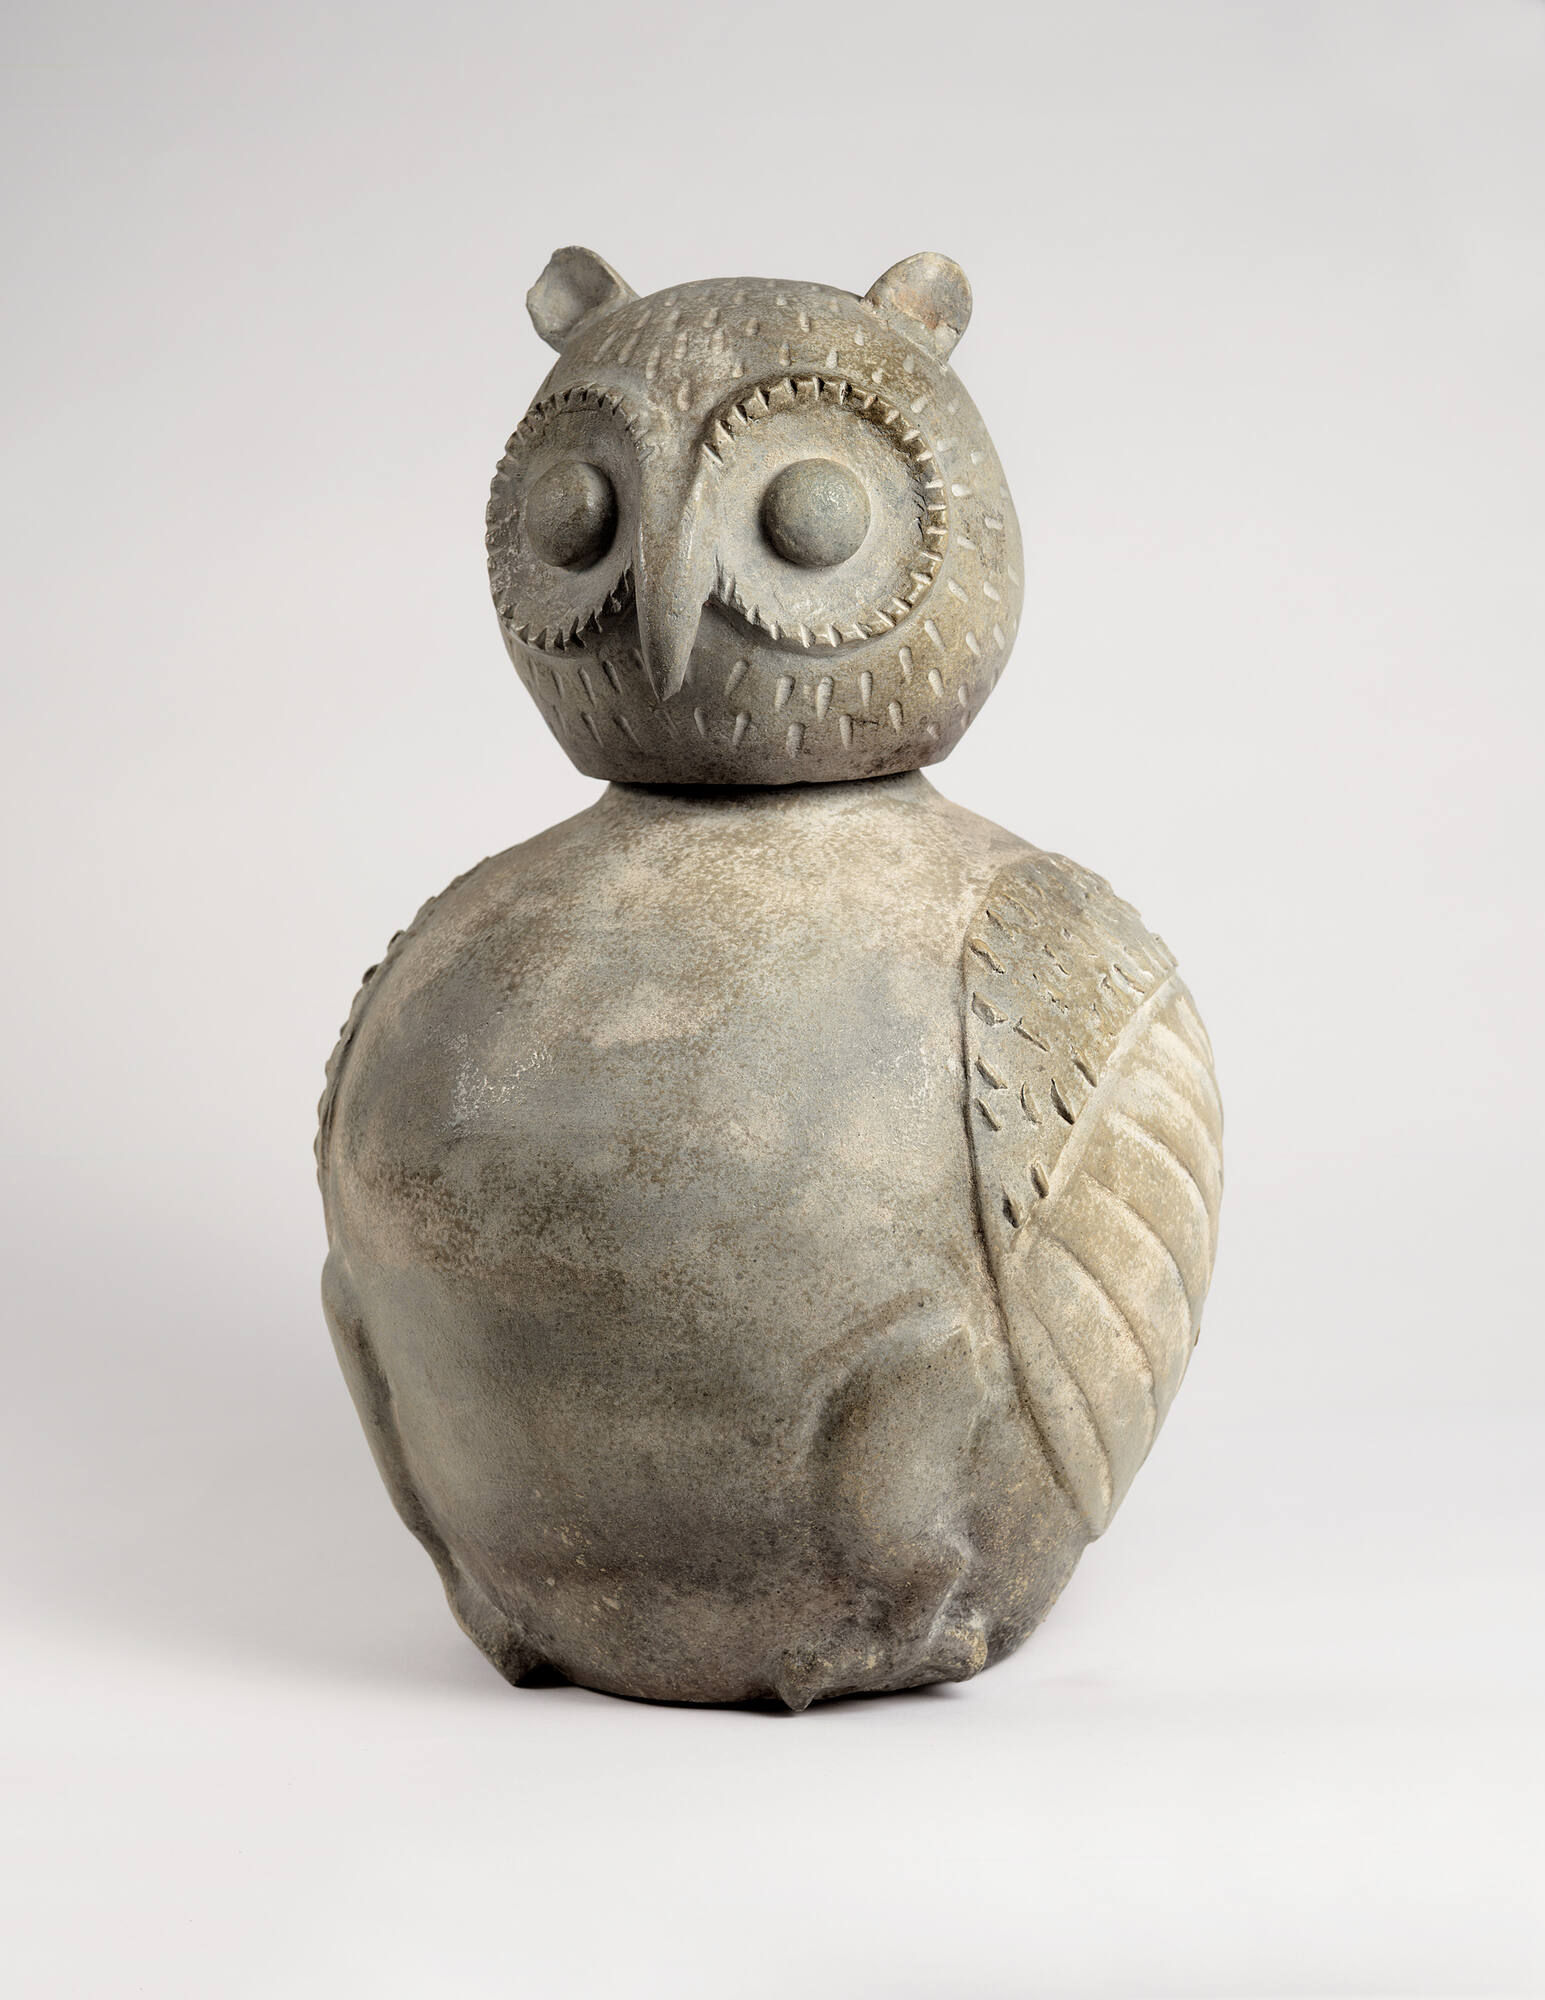 Image Vessel in the form of an owl